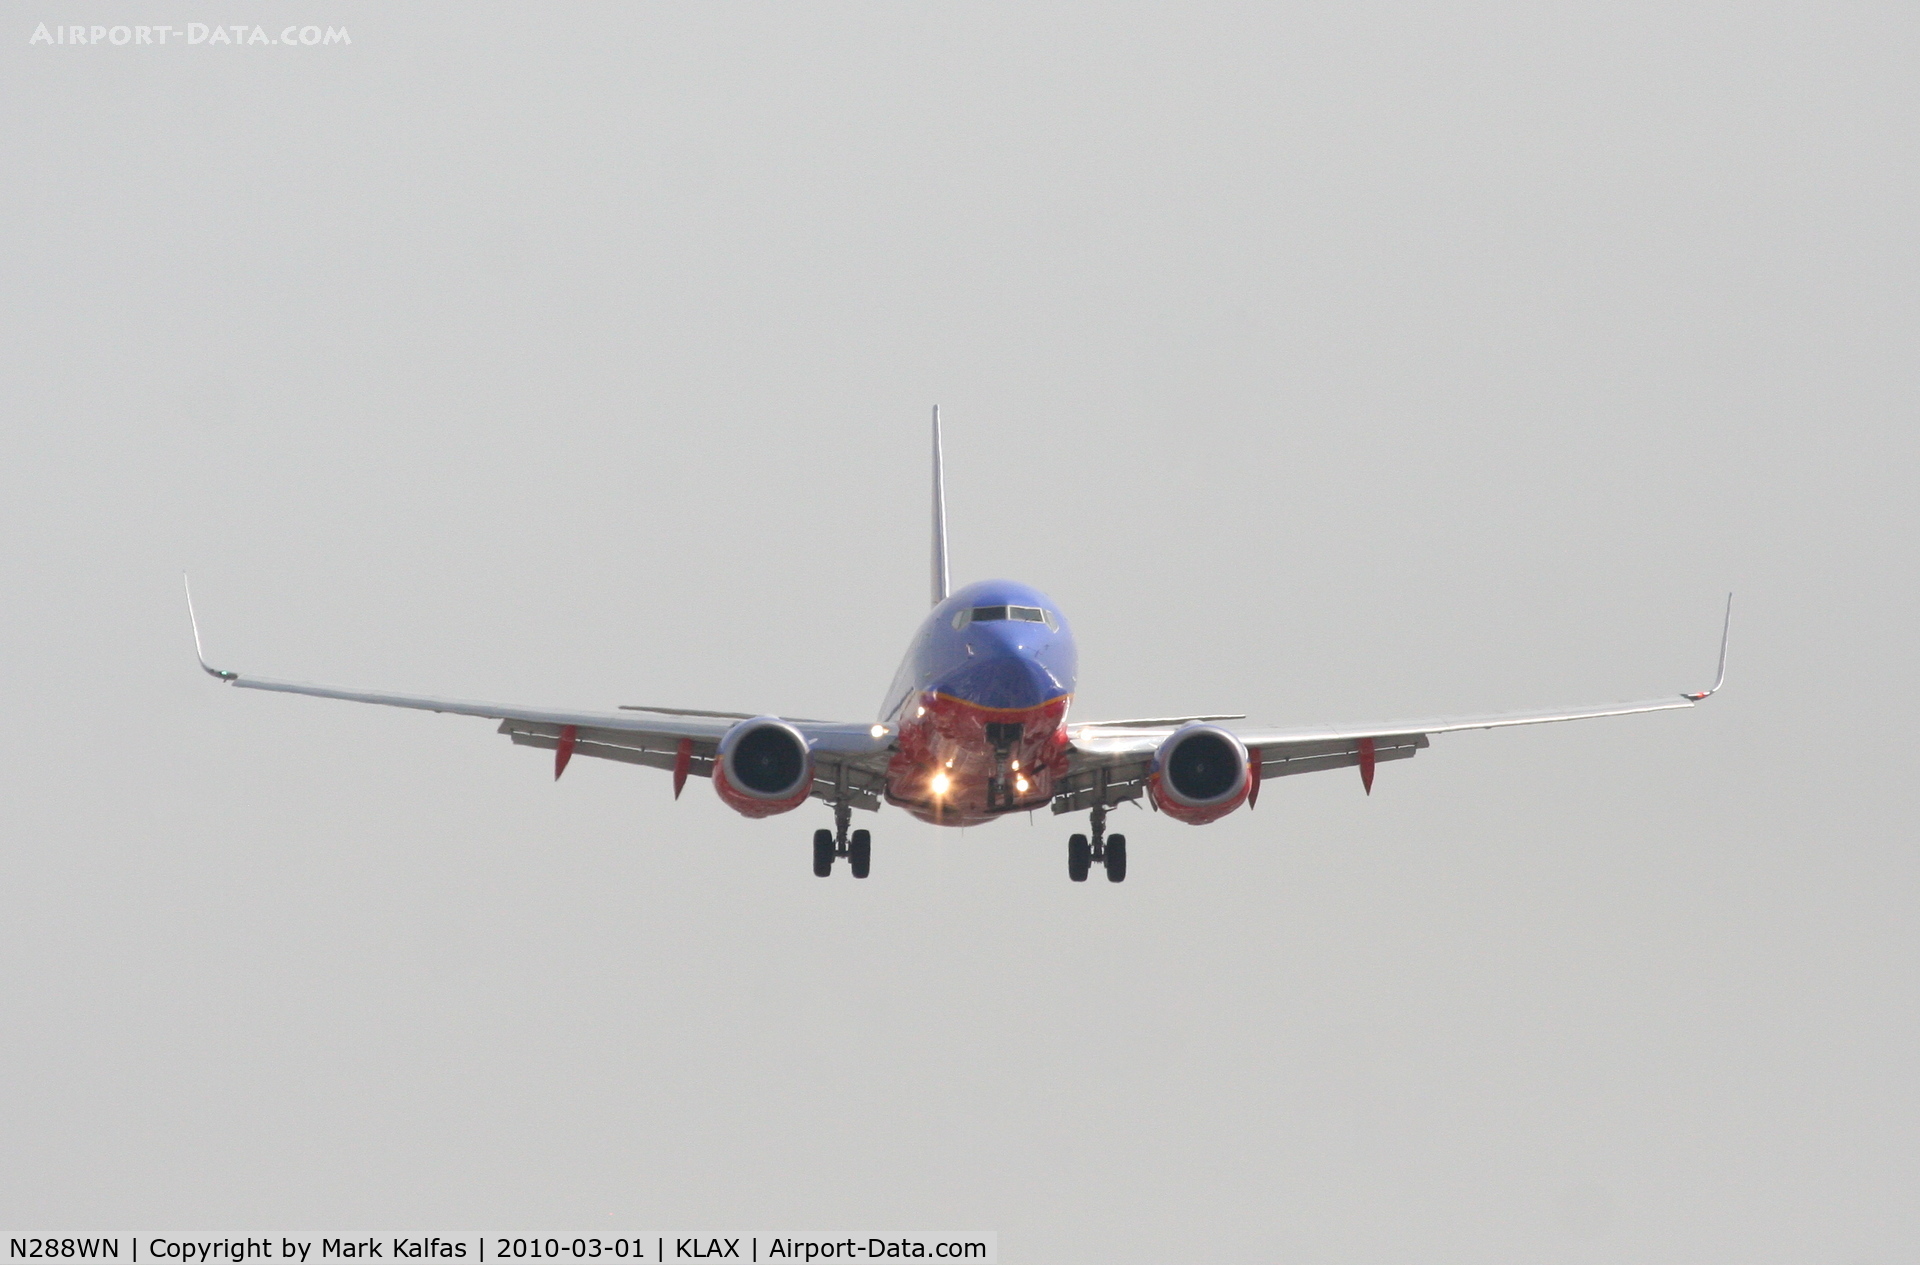 N288WN, 2007 Boeing 737-7H4 C/N 36611, Southwest Airlines Boeing 737-7H4, SWA3856 from KMDW, 24R approach KLAX.